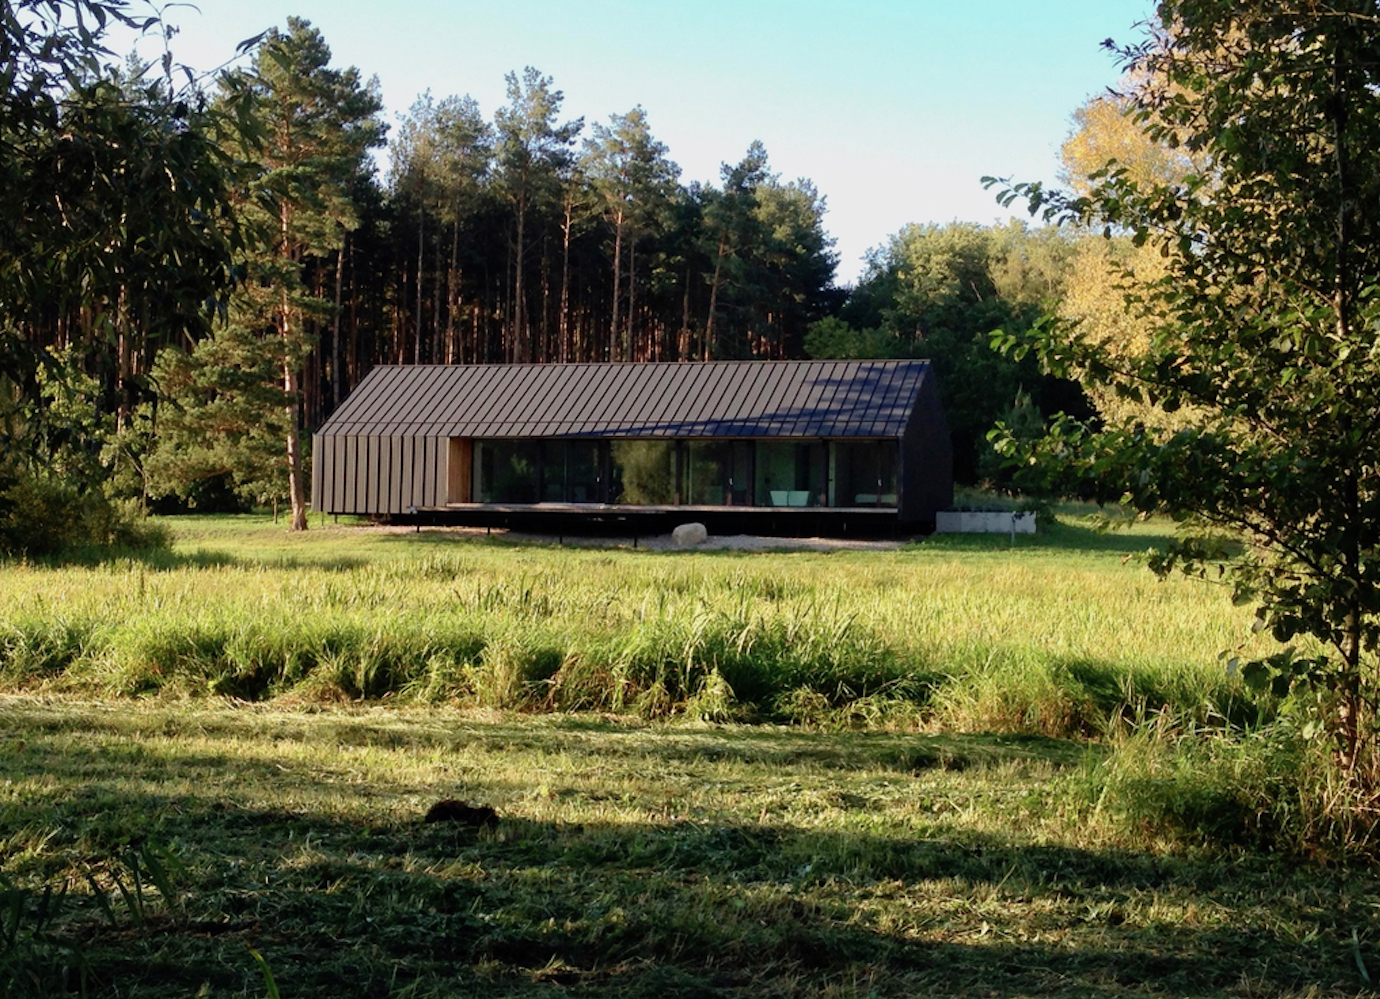 Built in a Polish nature reserve, this minimalist house blends into its natural home